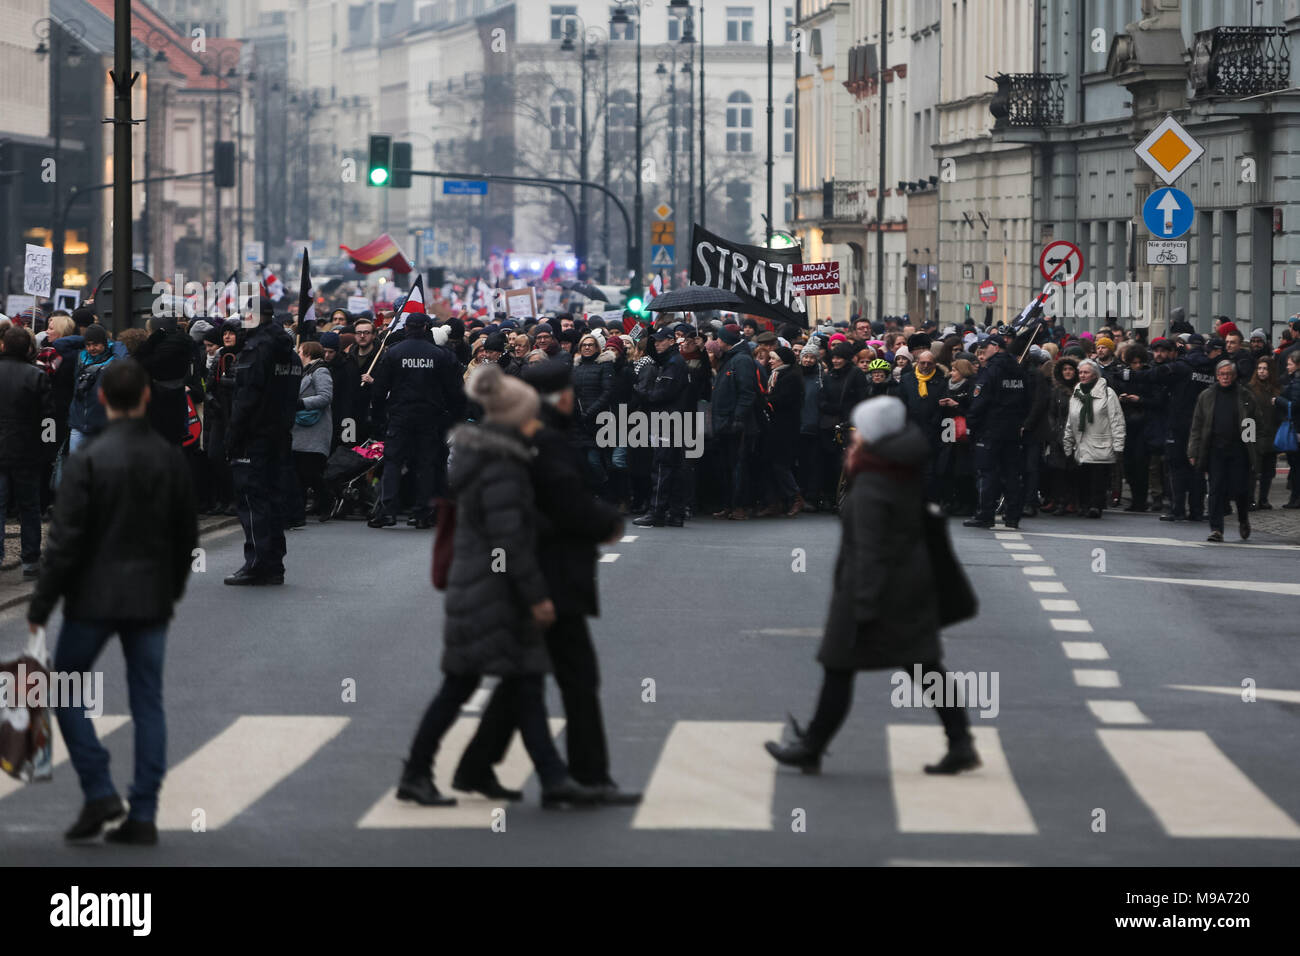 Warsaw, Poland. 23rd March, 2018. People attend protests against proposed anti-abortion draft law reffered by civil initiative in Polish Parliament. The issue of separating state and religion was also held, as Catholic Church was one of the main factors in political decisions. Stock Photo